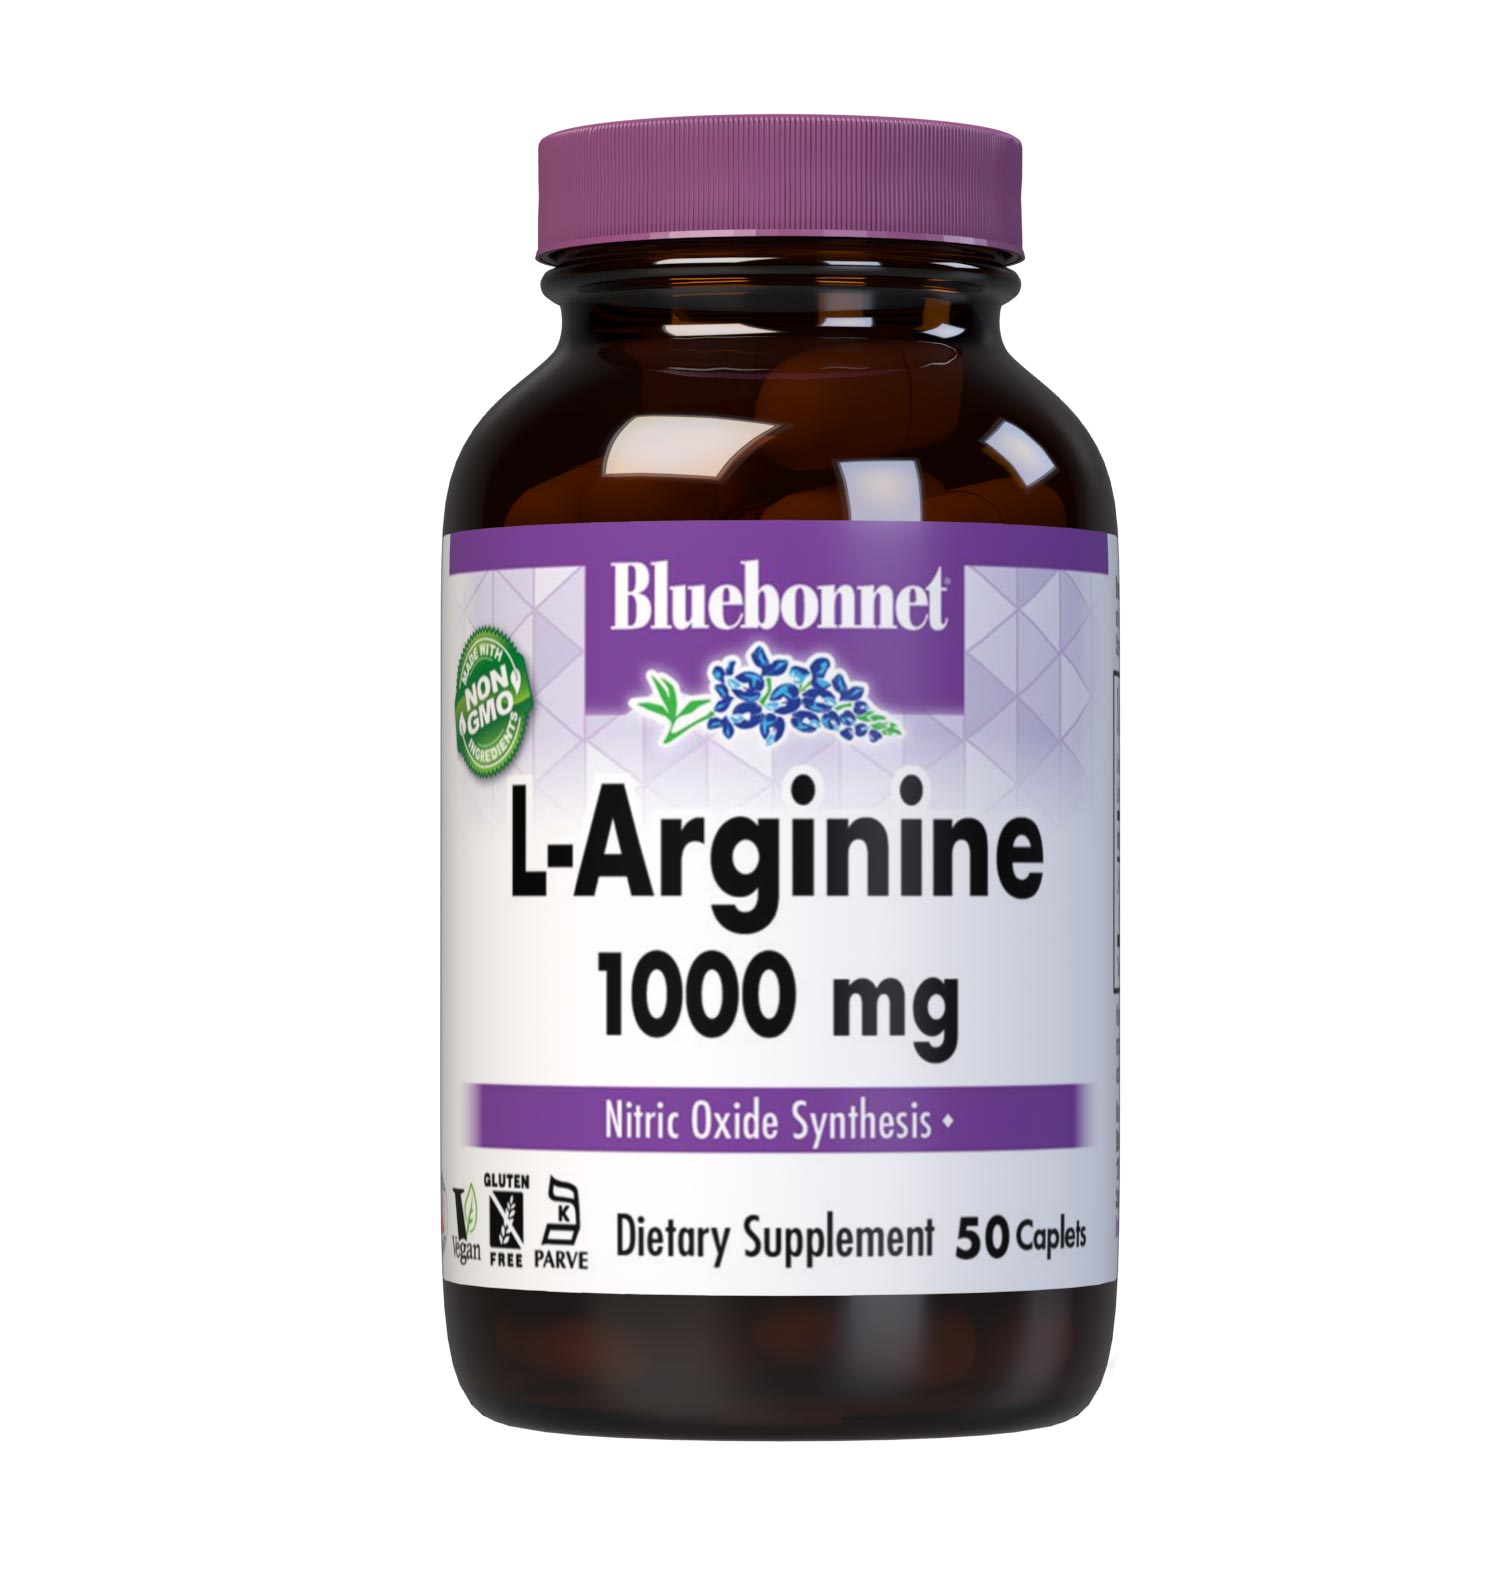 Bluebonnet’s L-Arginine 1000 mg 50 caplets are formulated with the free-form amino acid L-arginine in its crystalline form from Ajinomoto, which supports nitric oxide synthesis and men’s health/performance. #size_50 count